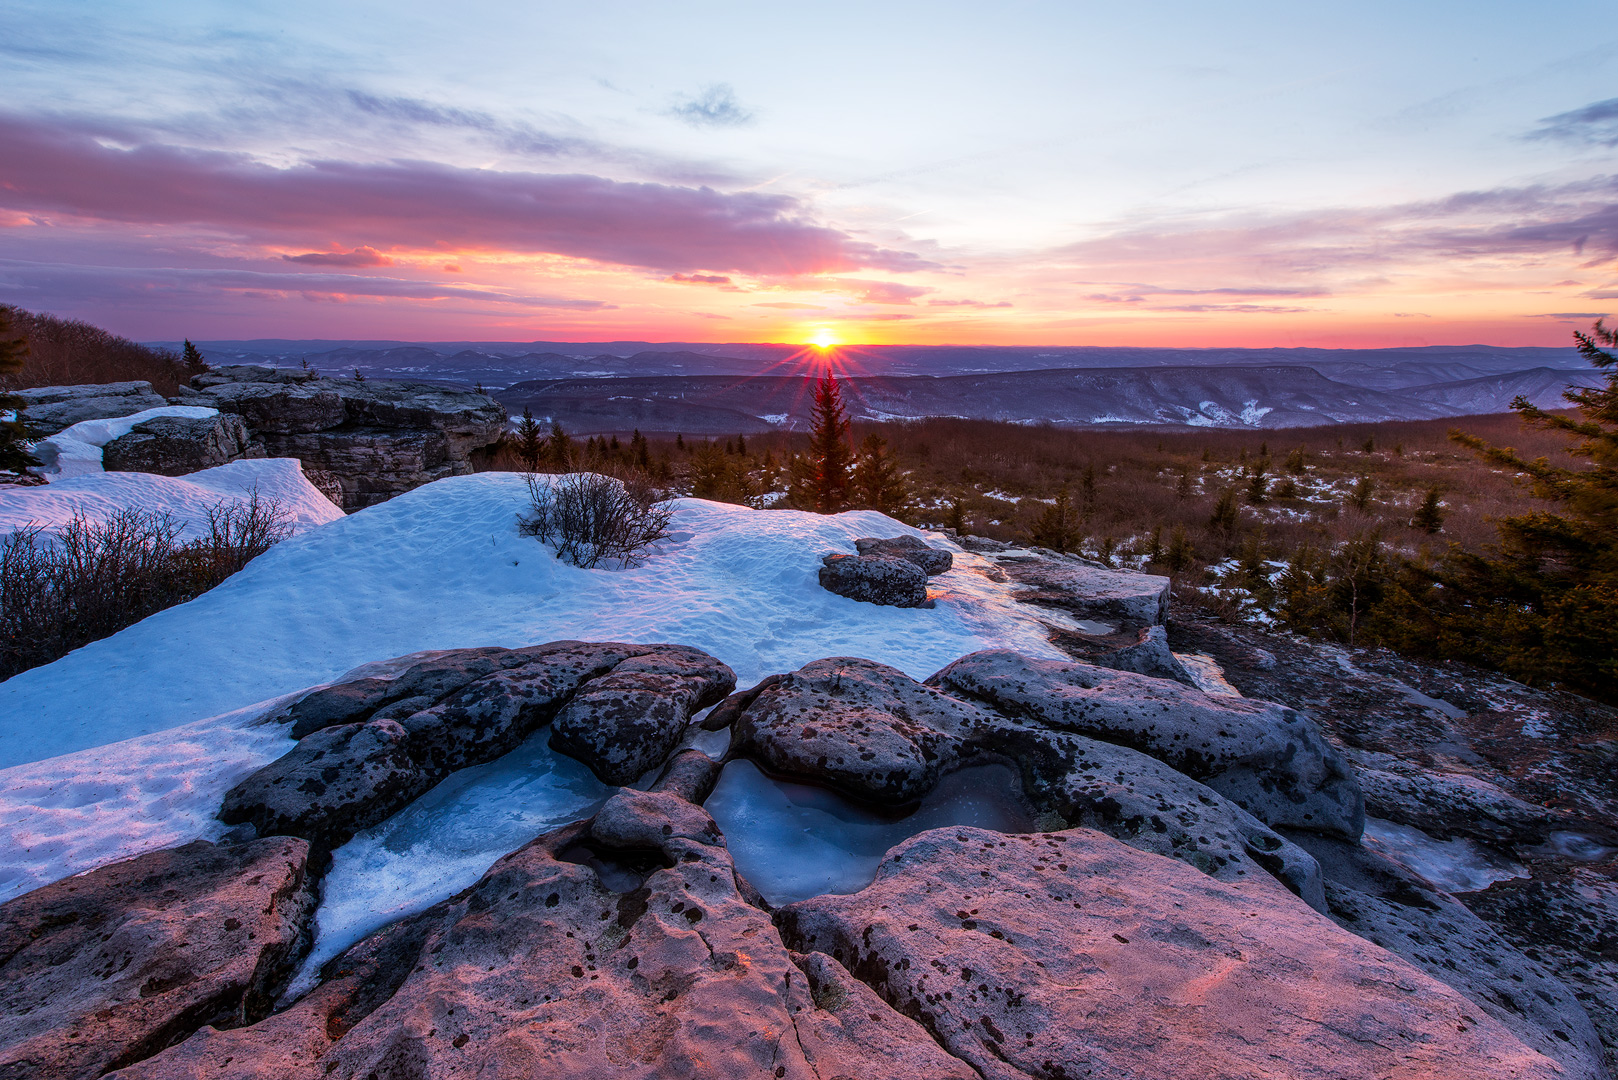 I have photographed many sunrises on Dolly Sods; however, this image will be the most memorable image I have ever captured from...